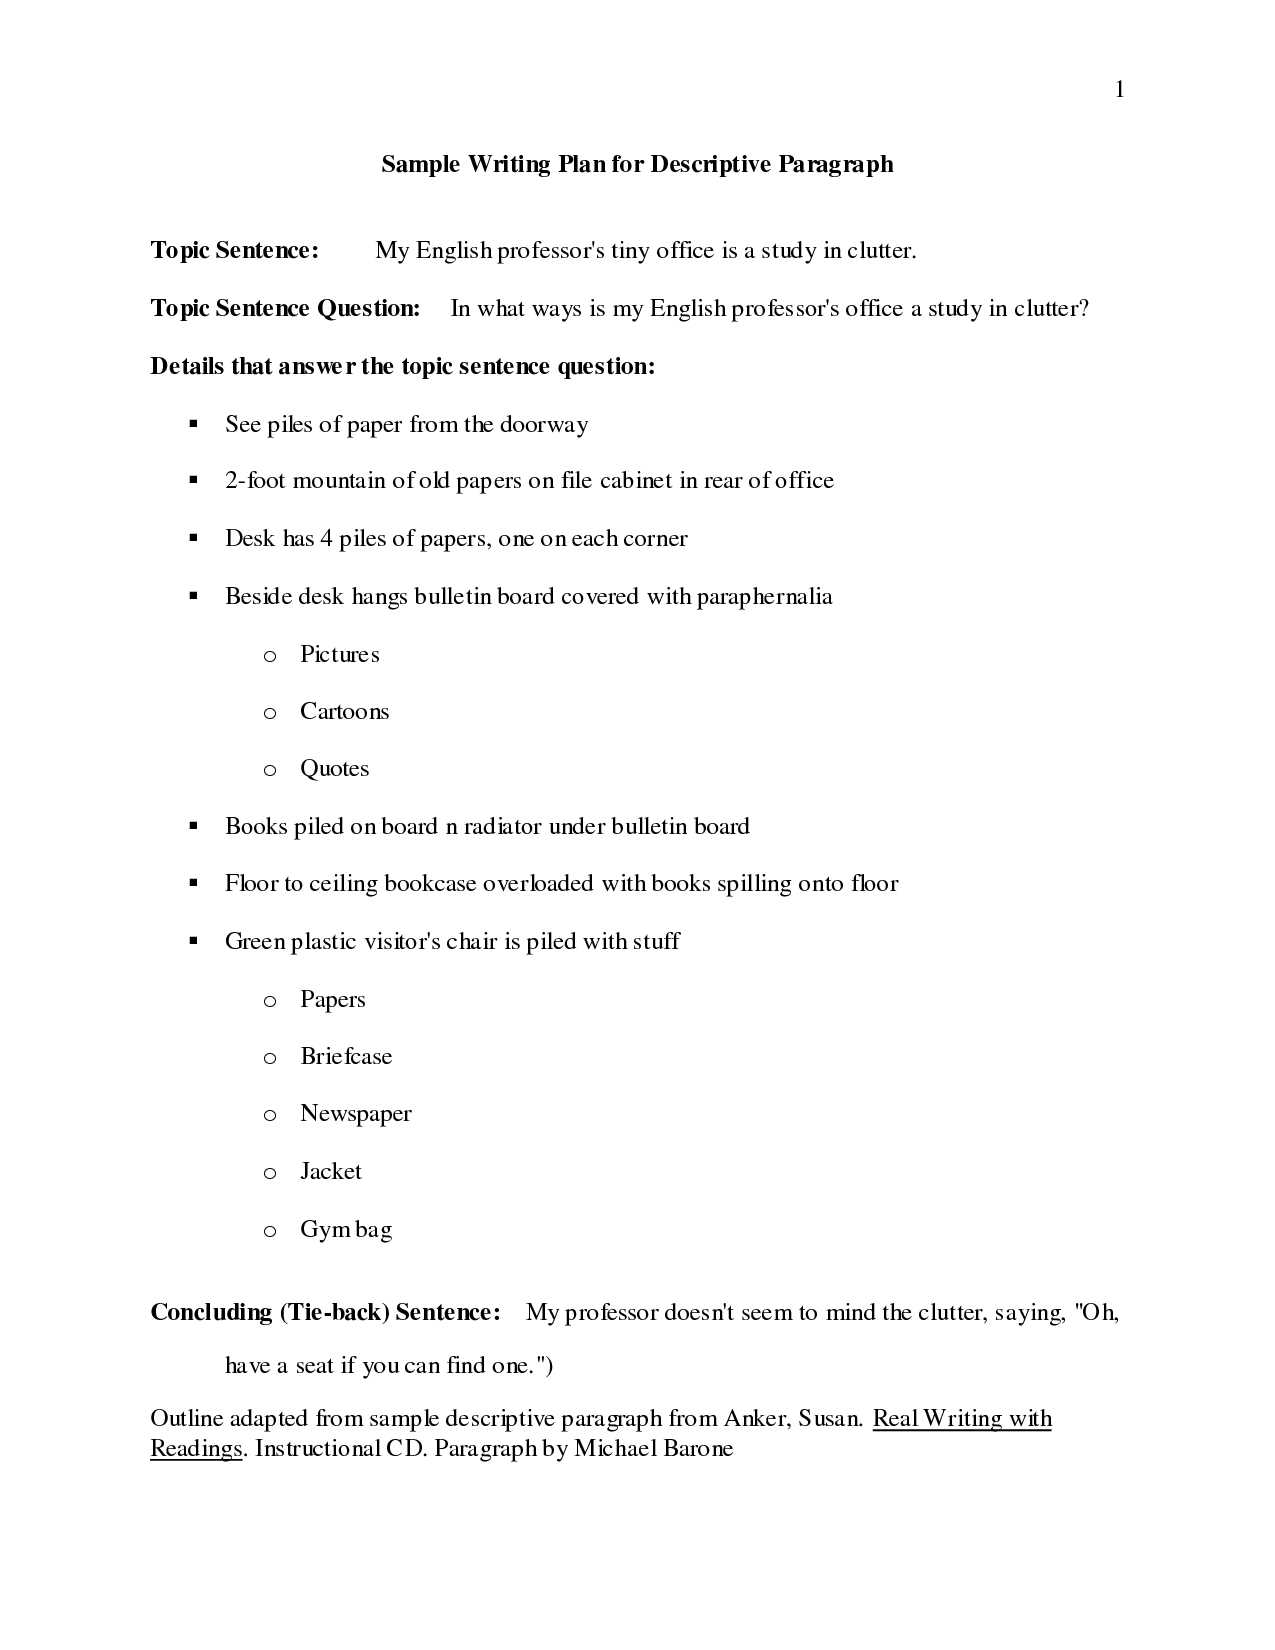 Anatomy Of the Constitution Worksheet as Well as Essay Outline Samples Business Essay Outline Research Paper